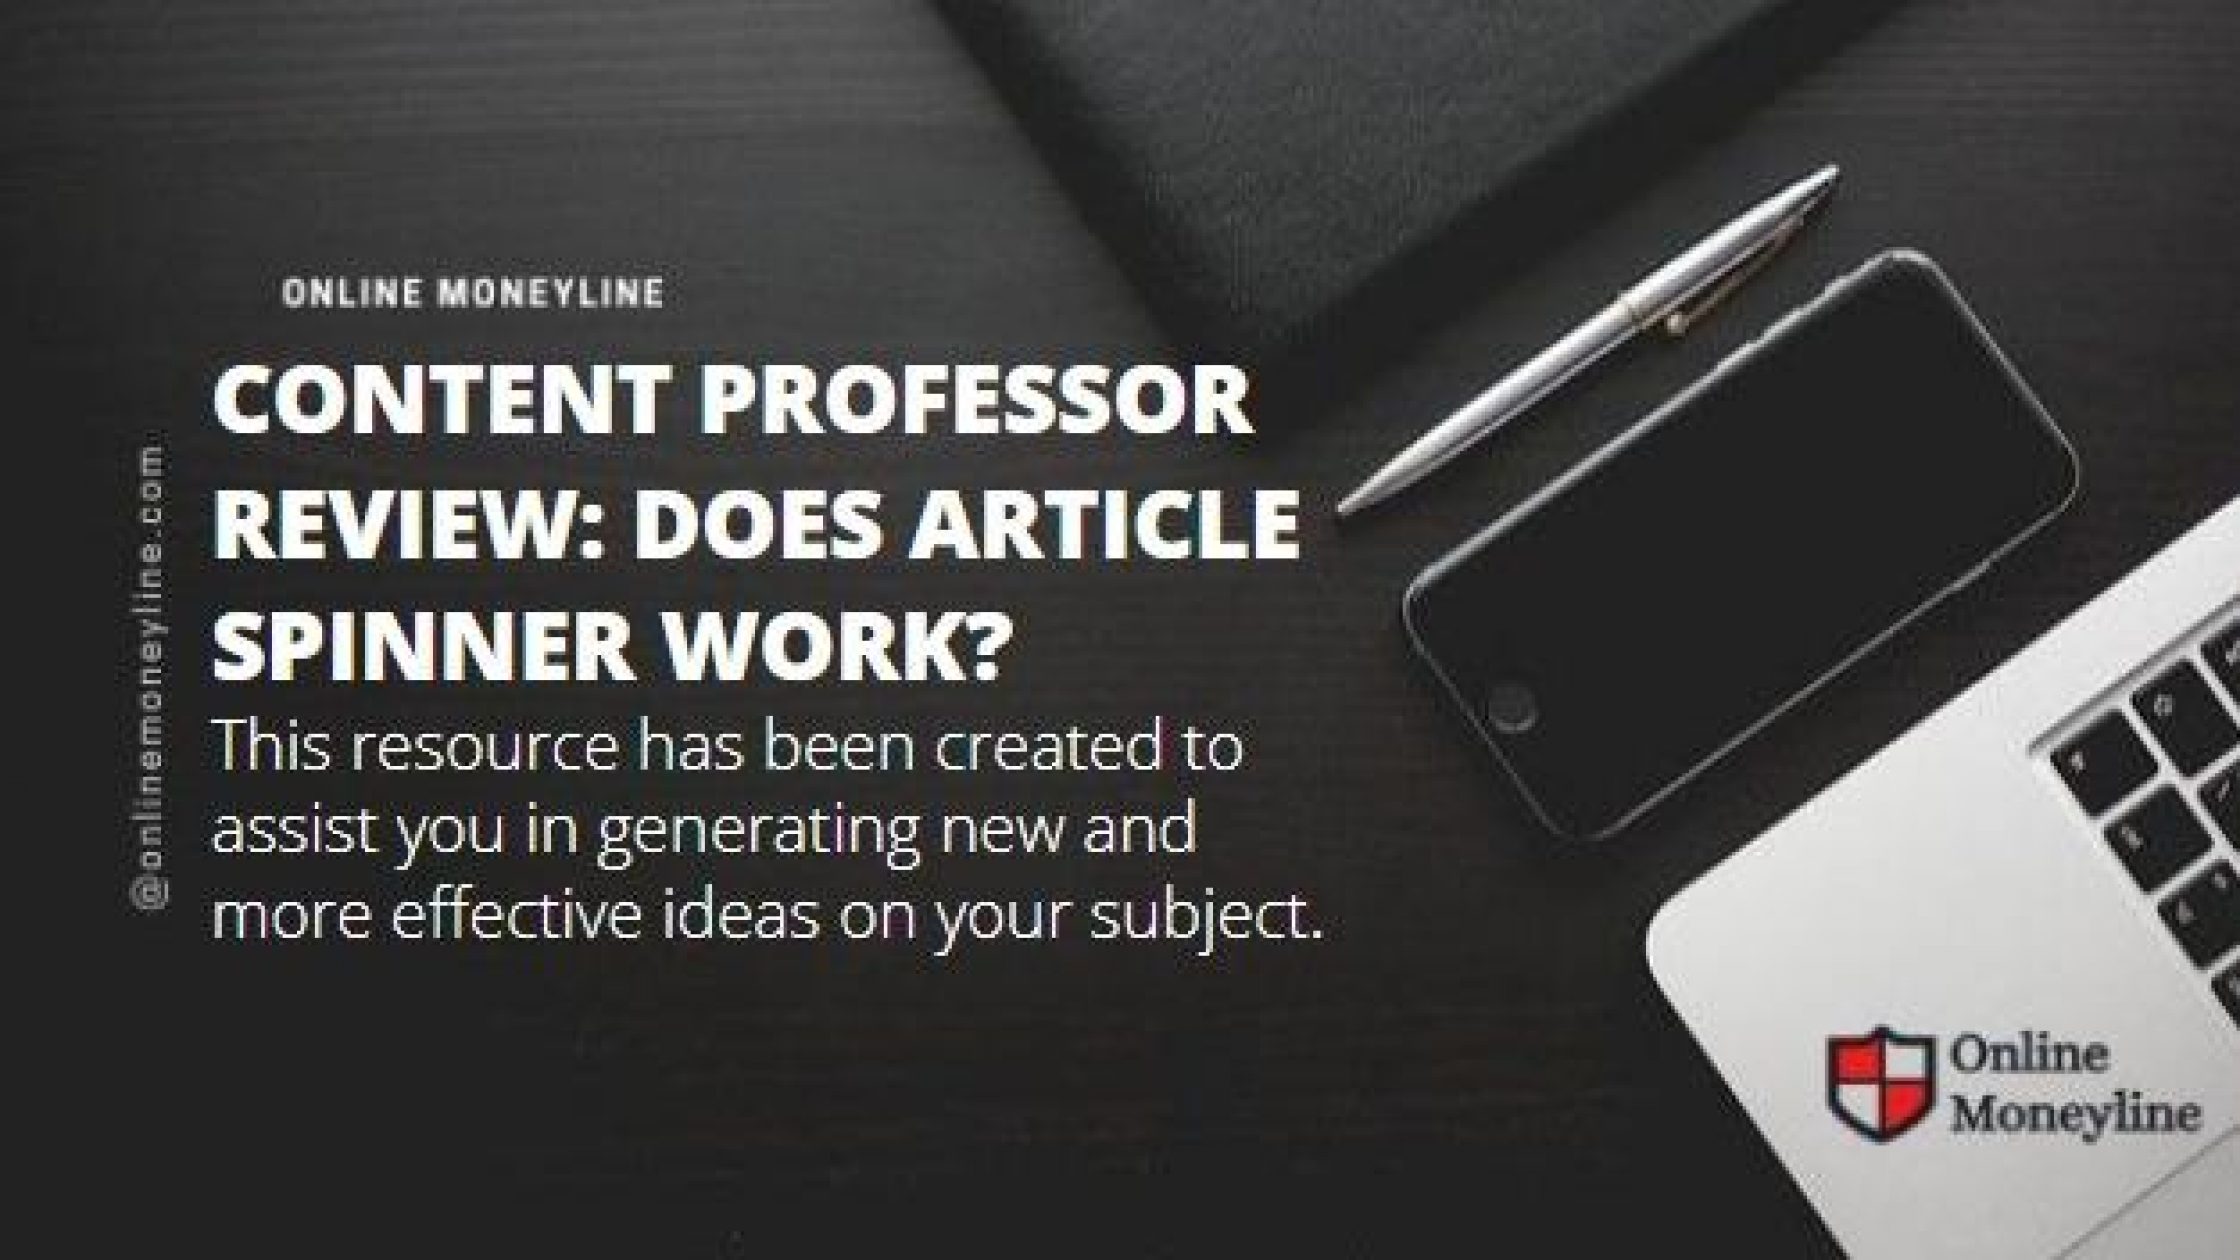 Content Professor Review: Does article spinner work?